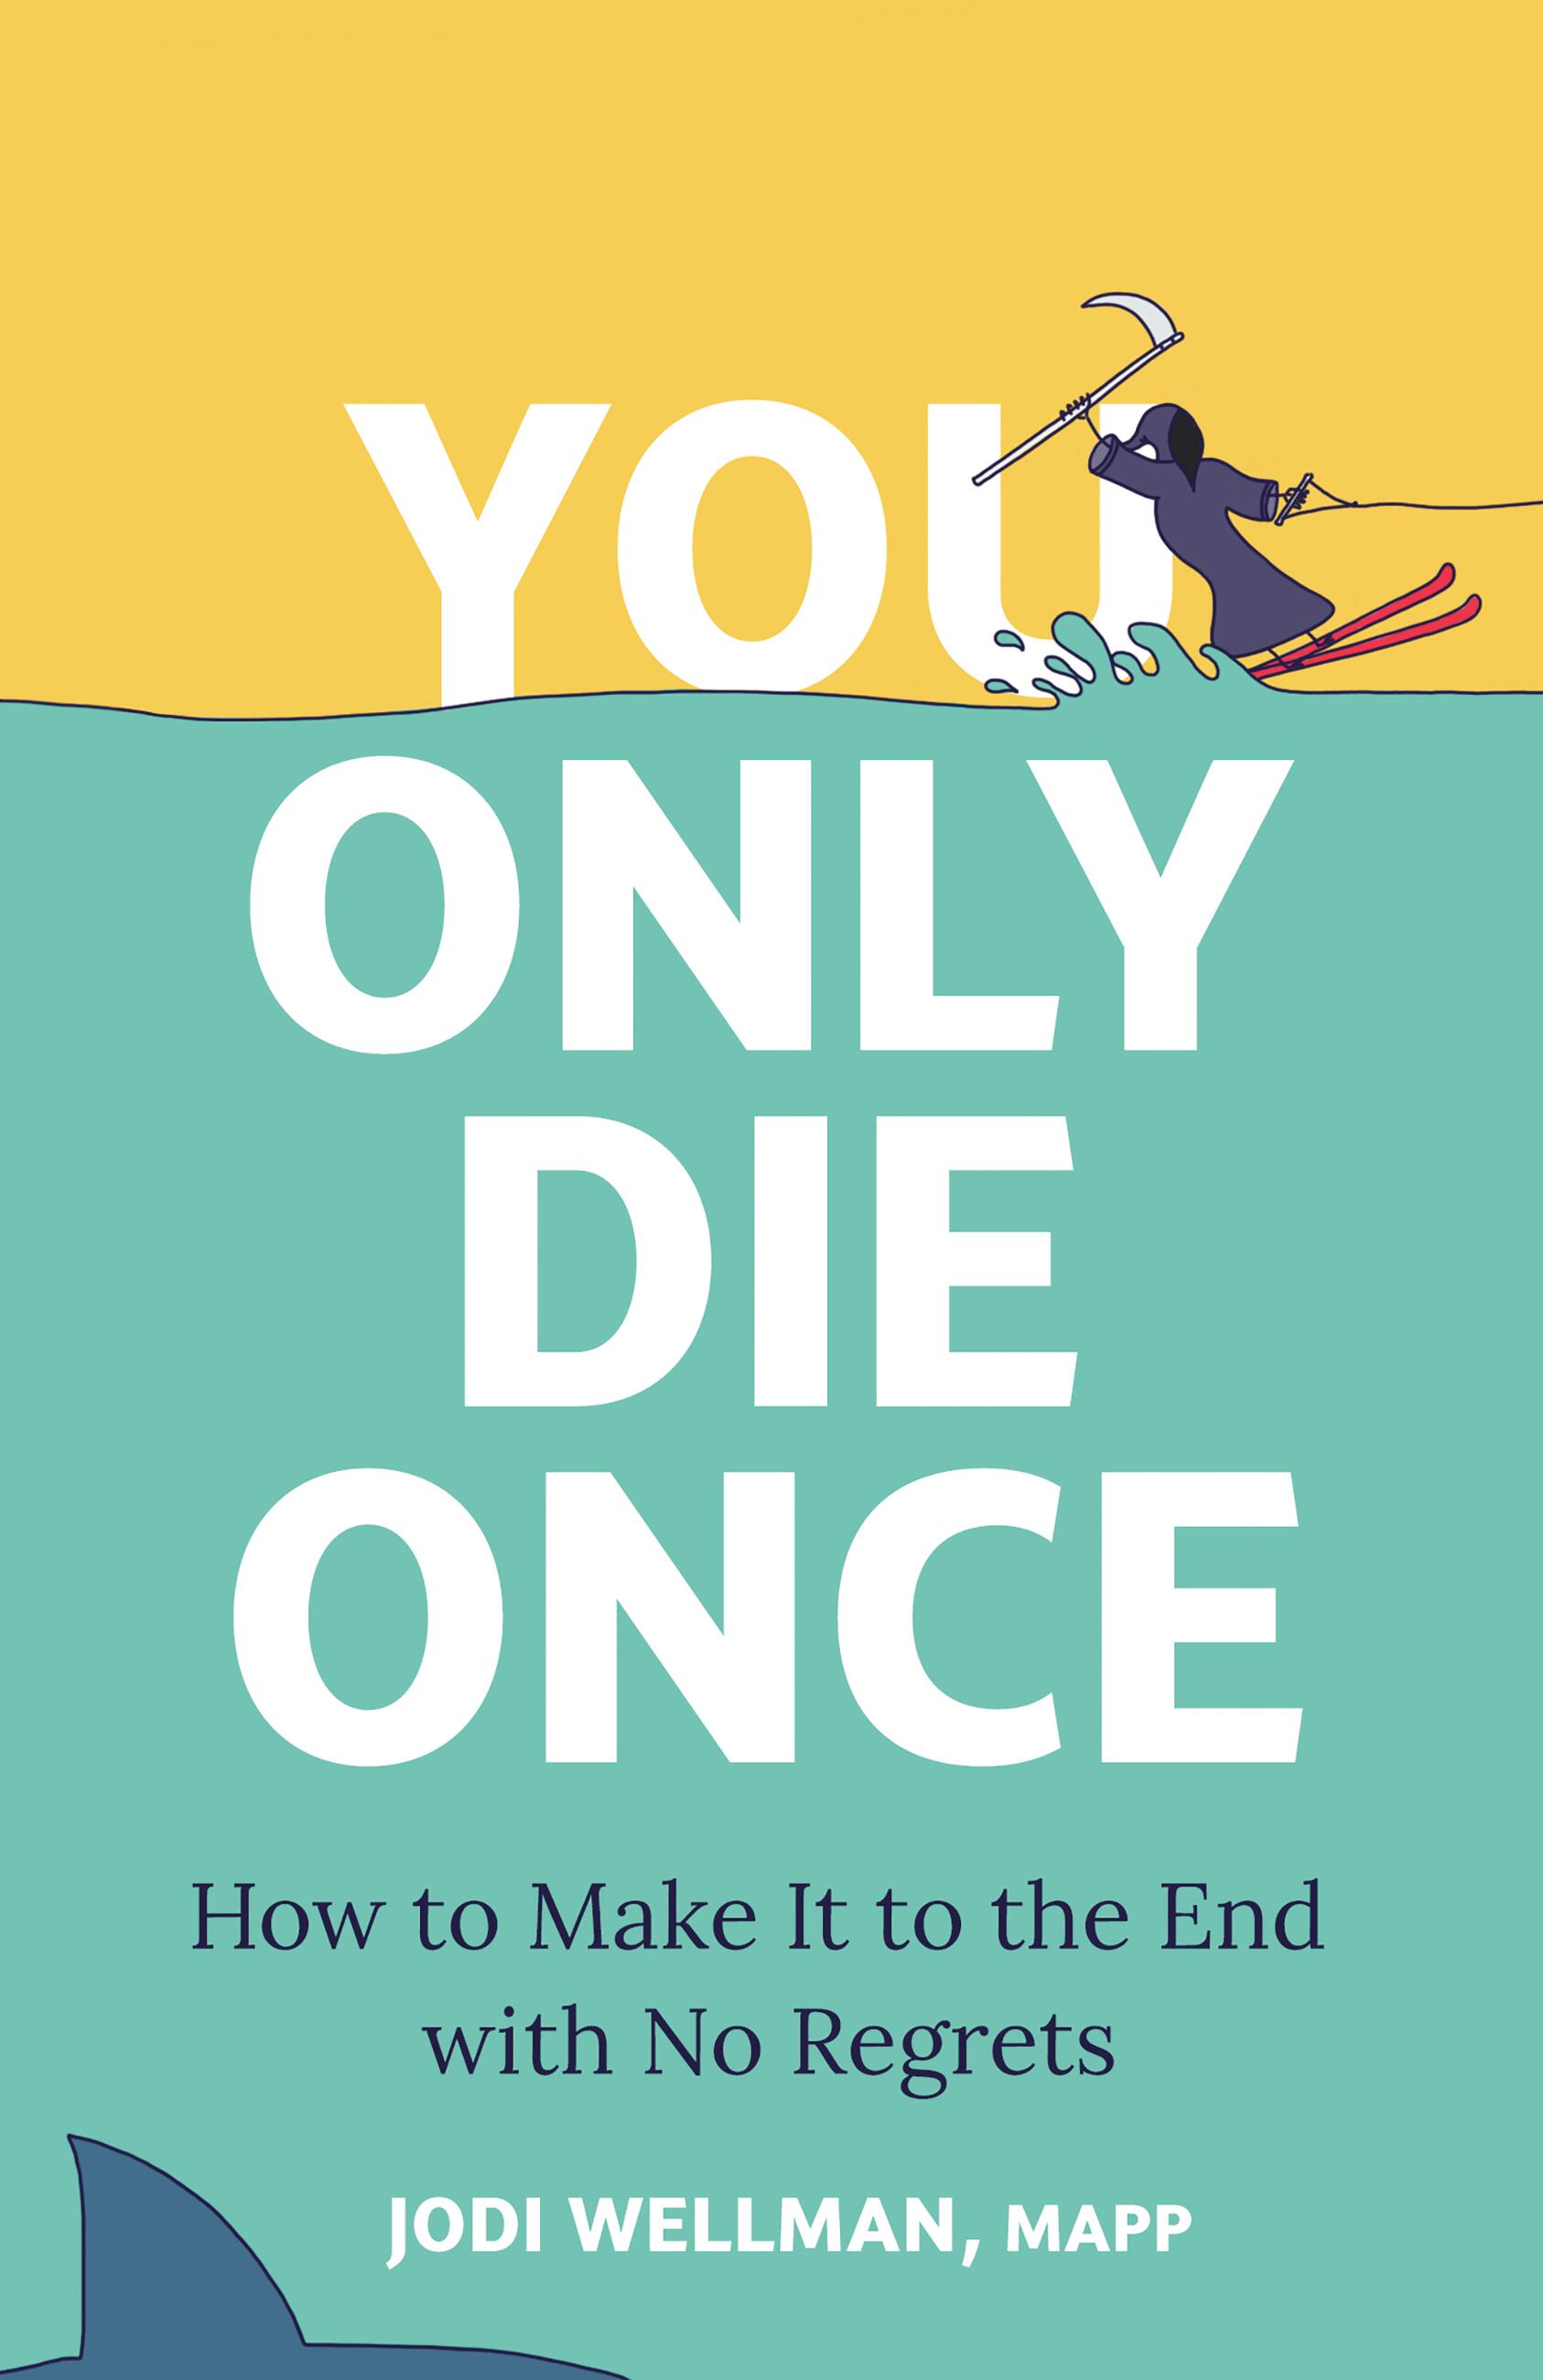 You　Book　Hachette　Only　Wellman　Die　Jodi　by　Once　Group